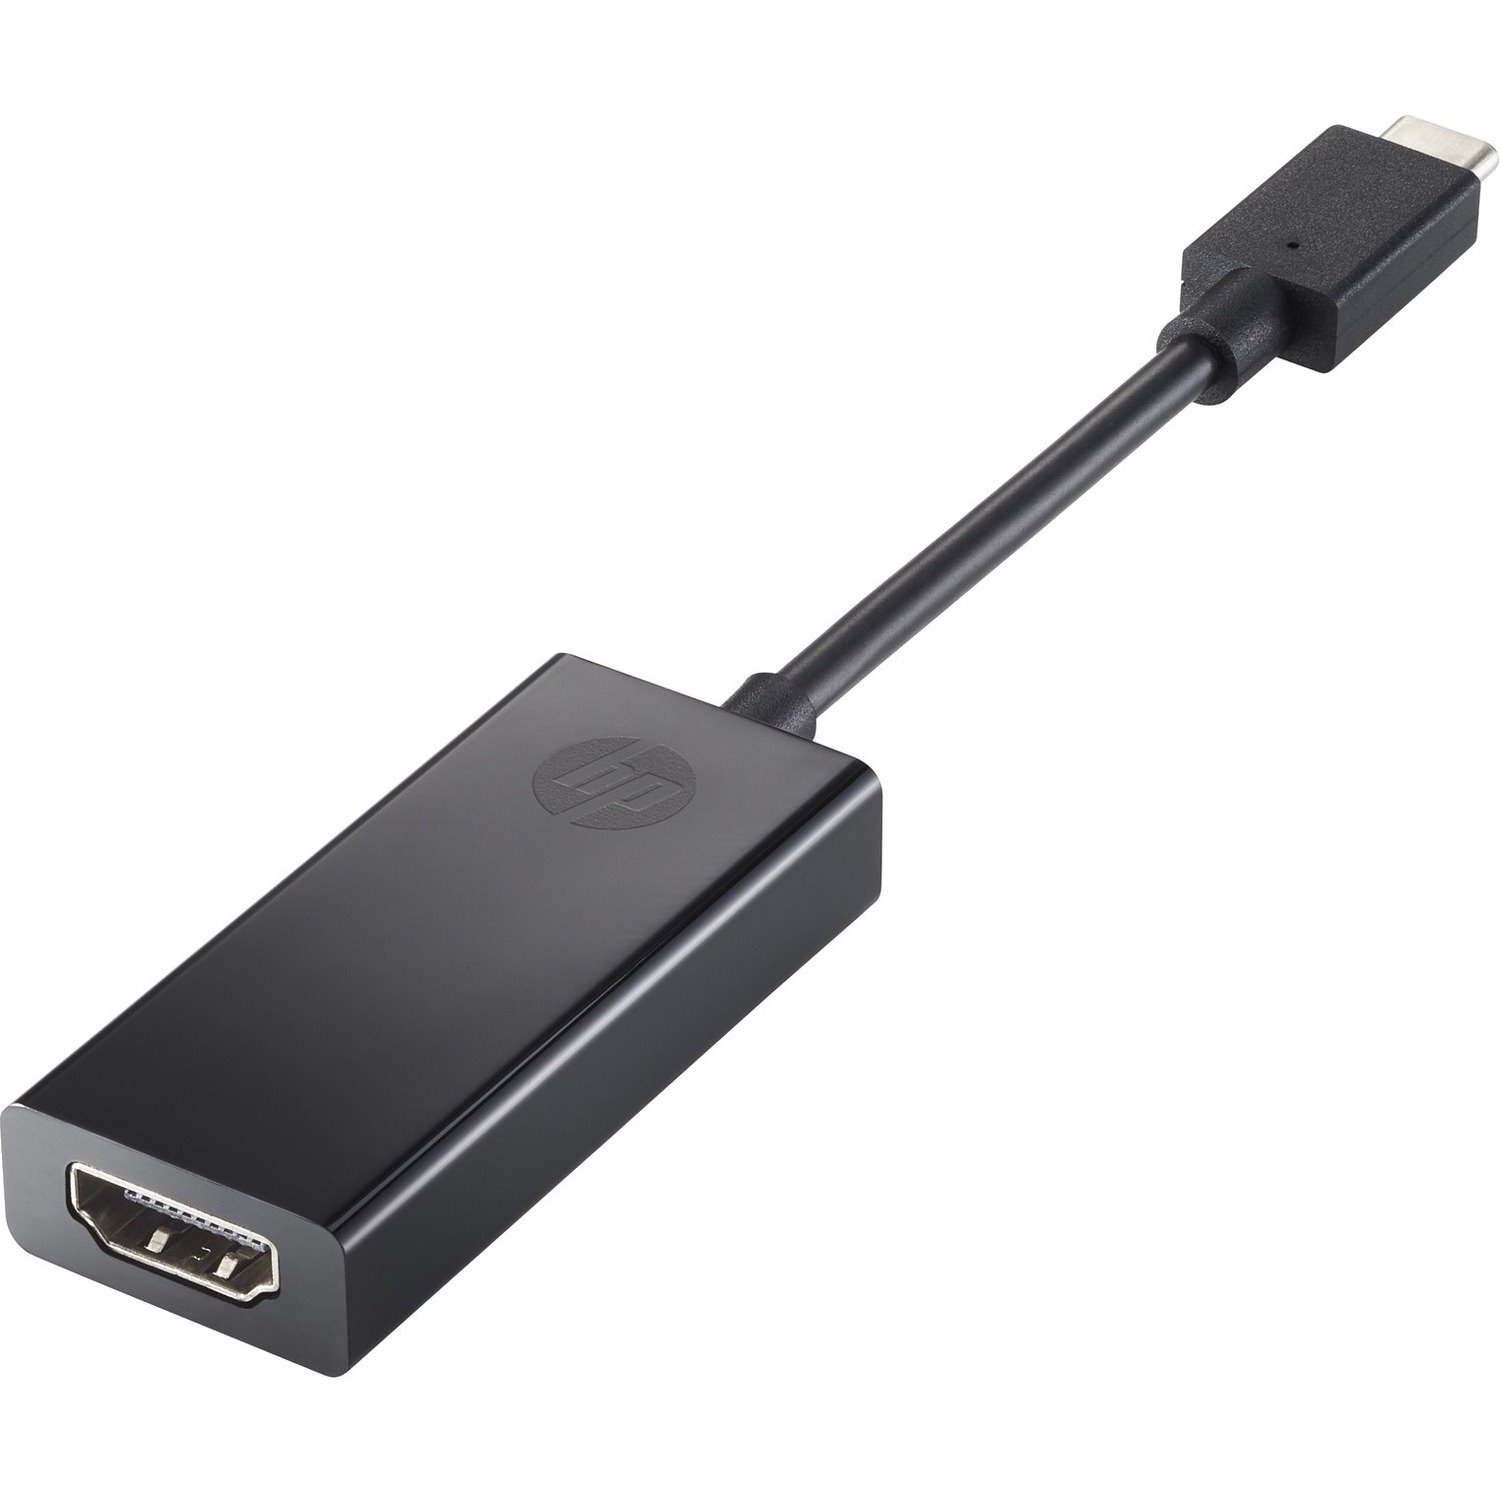 HP Graphic Adapter